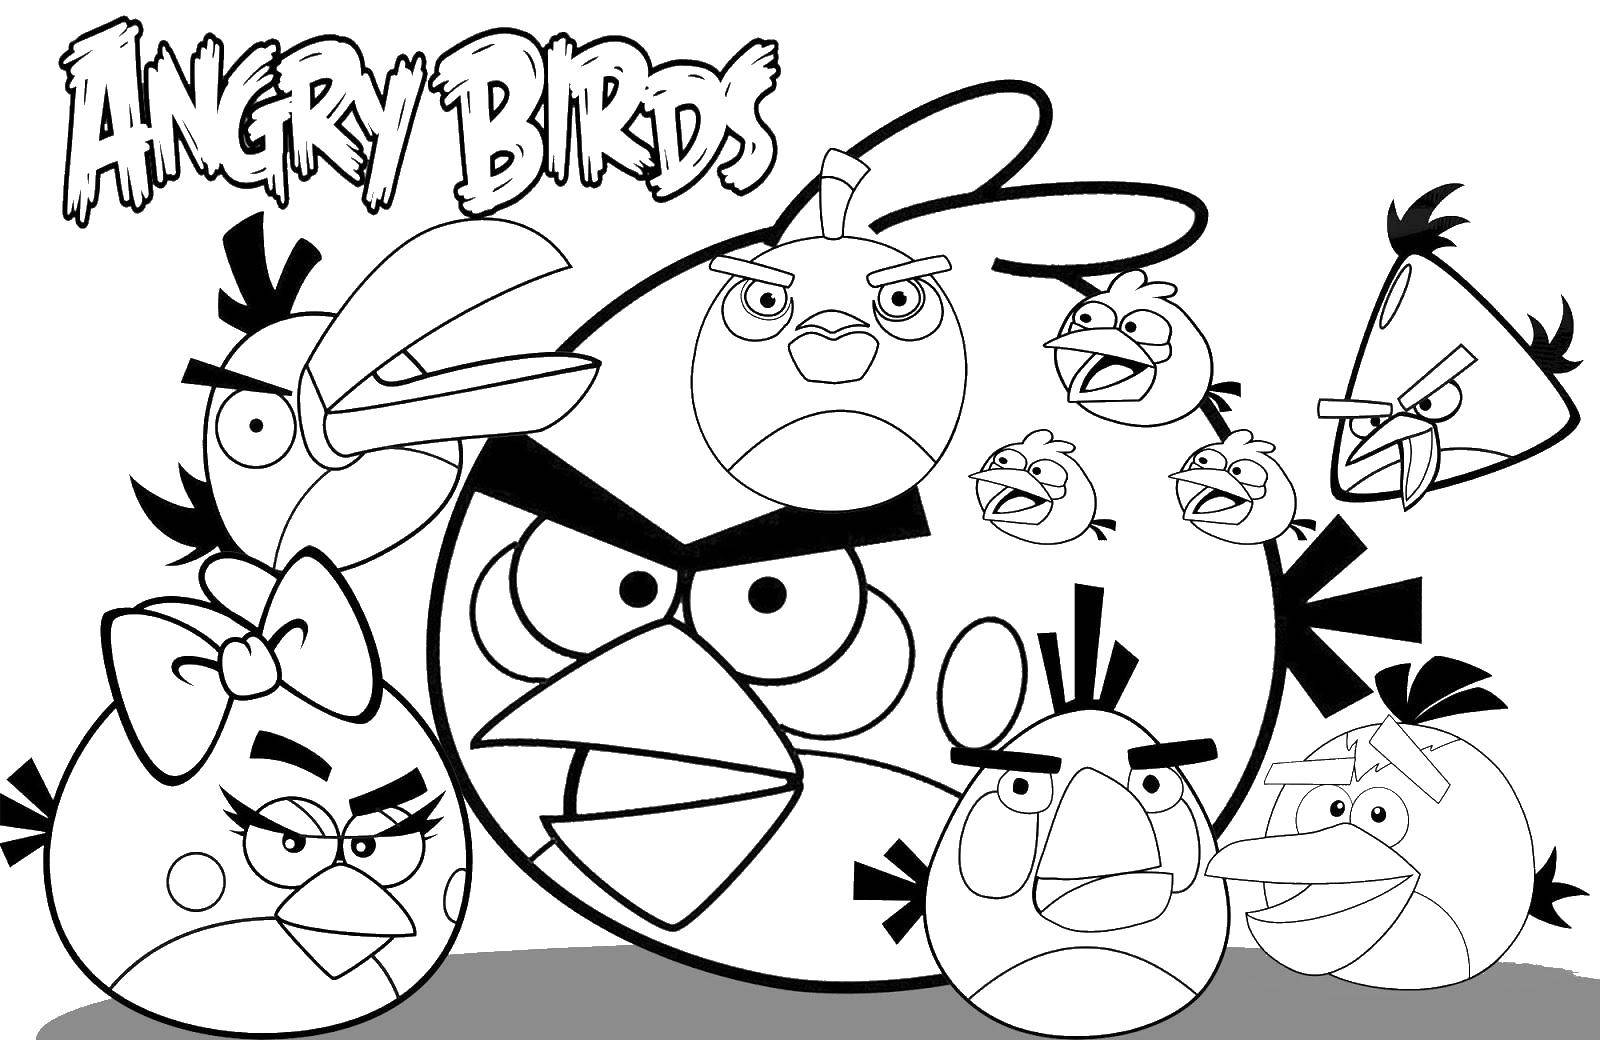 Coloring Team angry birds. Category angry birds. Tags:  Games, Angry Birds .